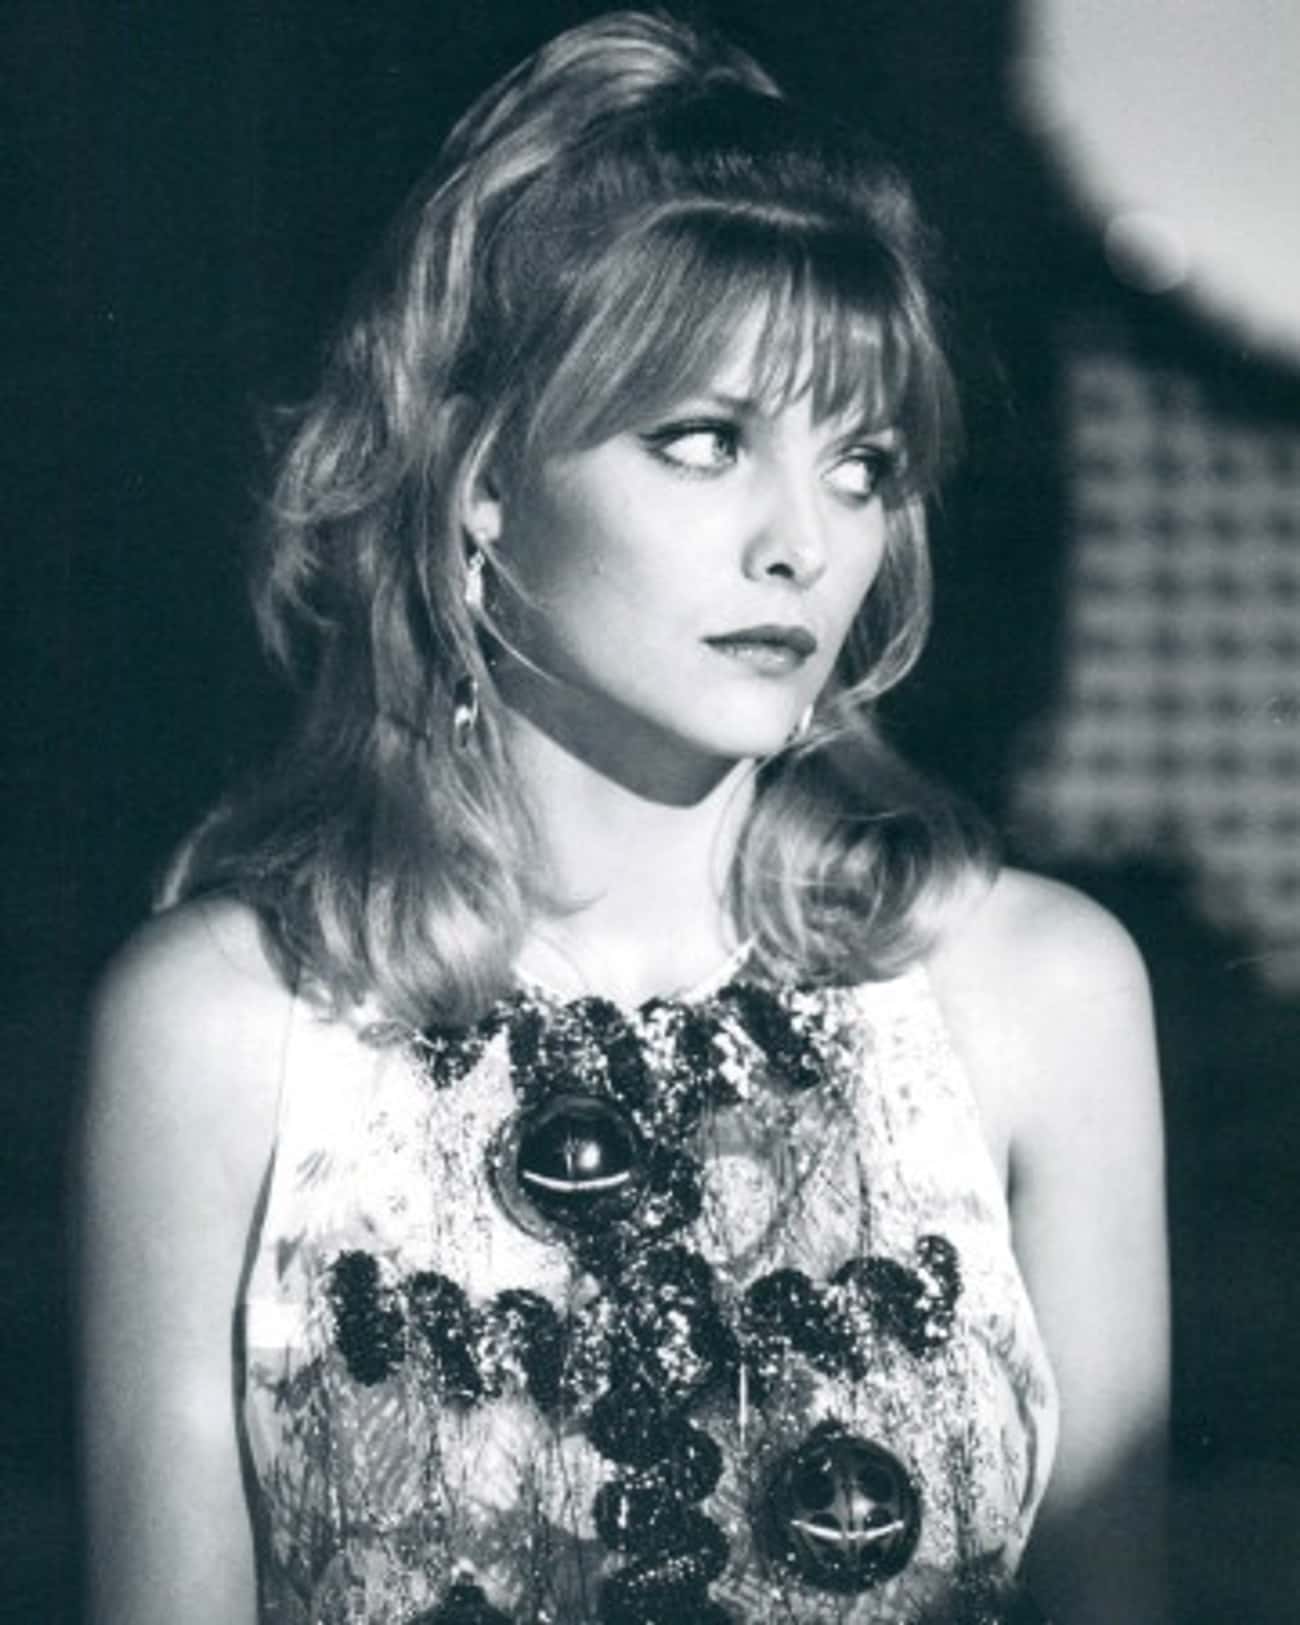 Young Michelle Pfeiffer in a Patterned Dress